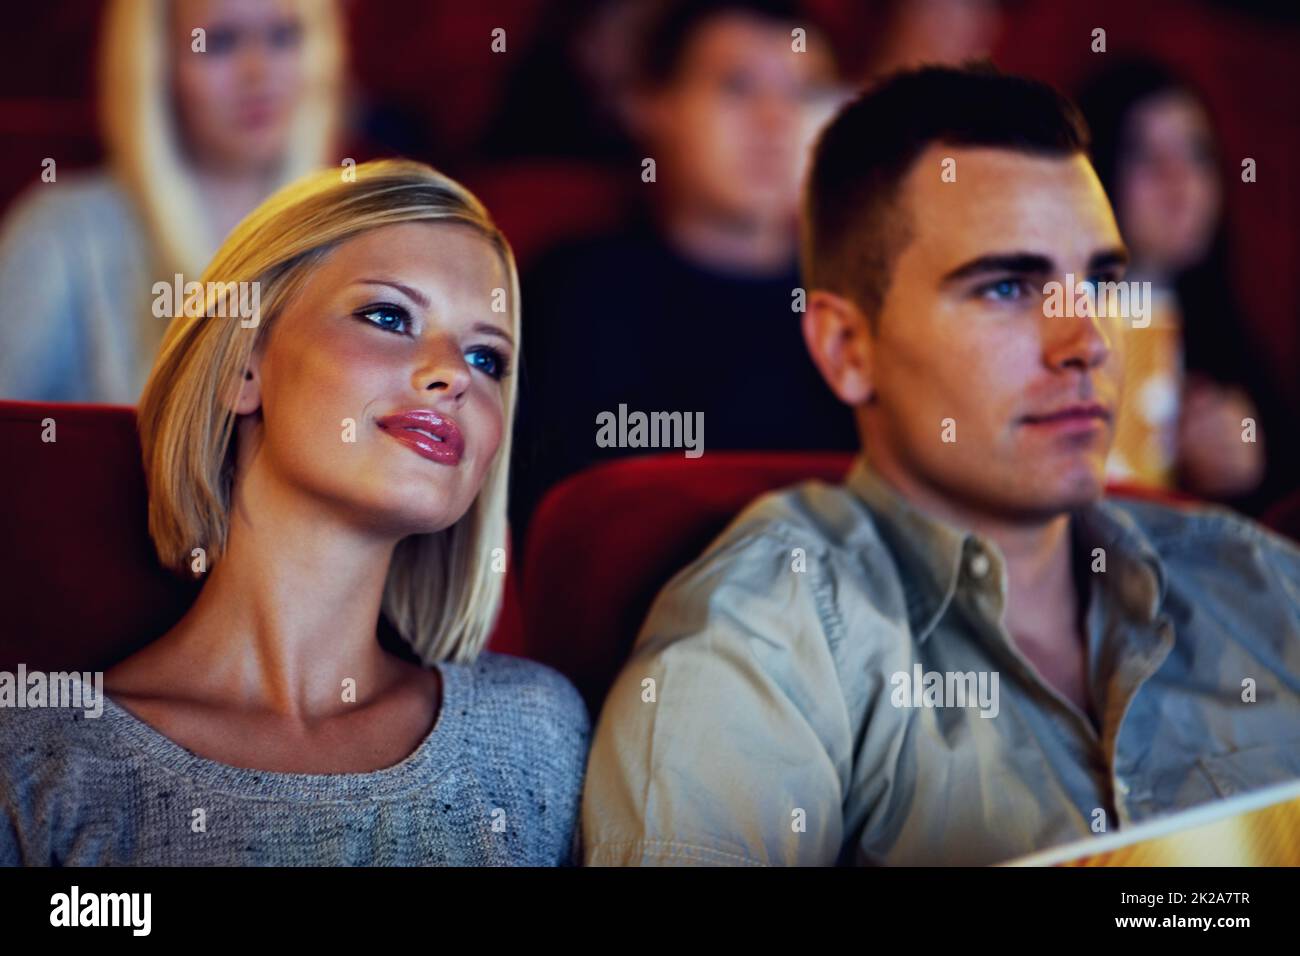 Date night. A cute young couple watching a movie in a cinema together. Stock Photo